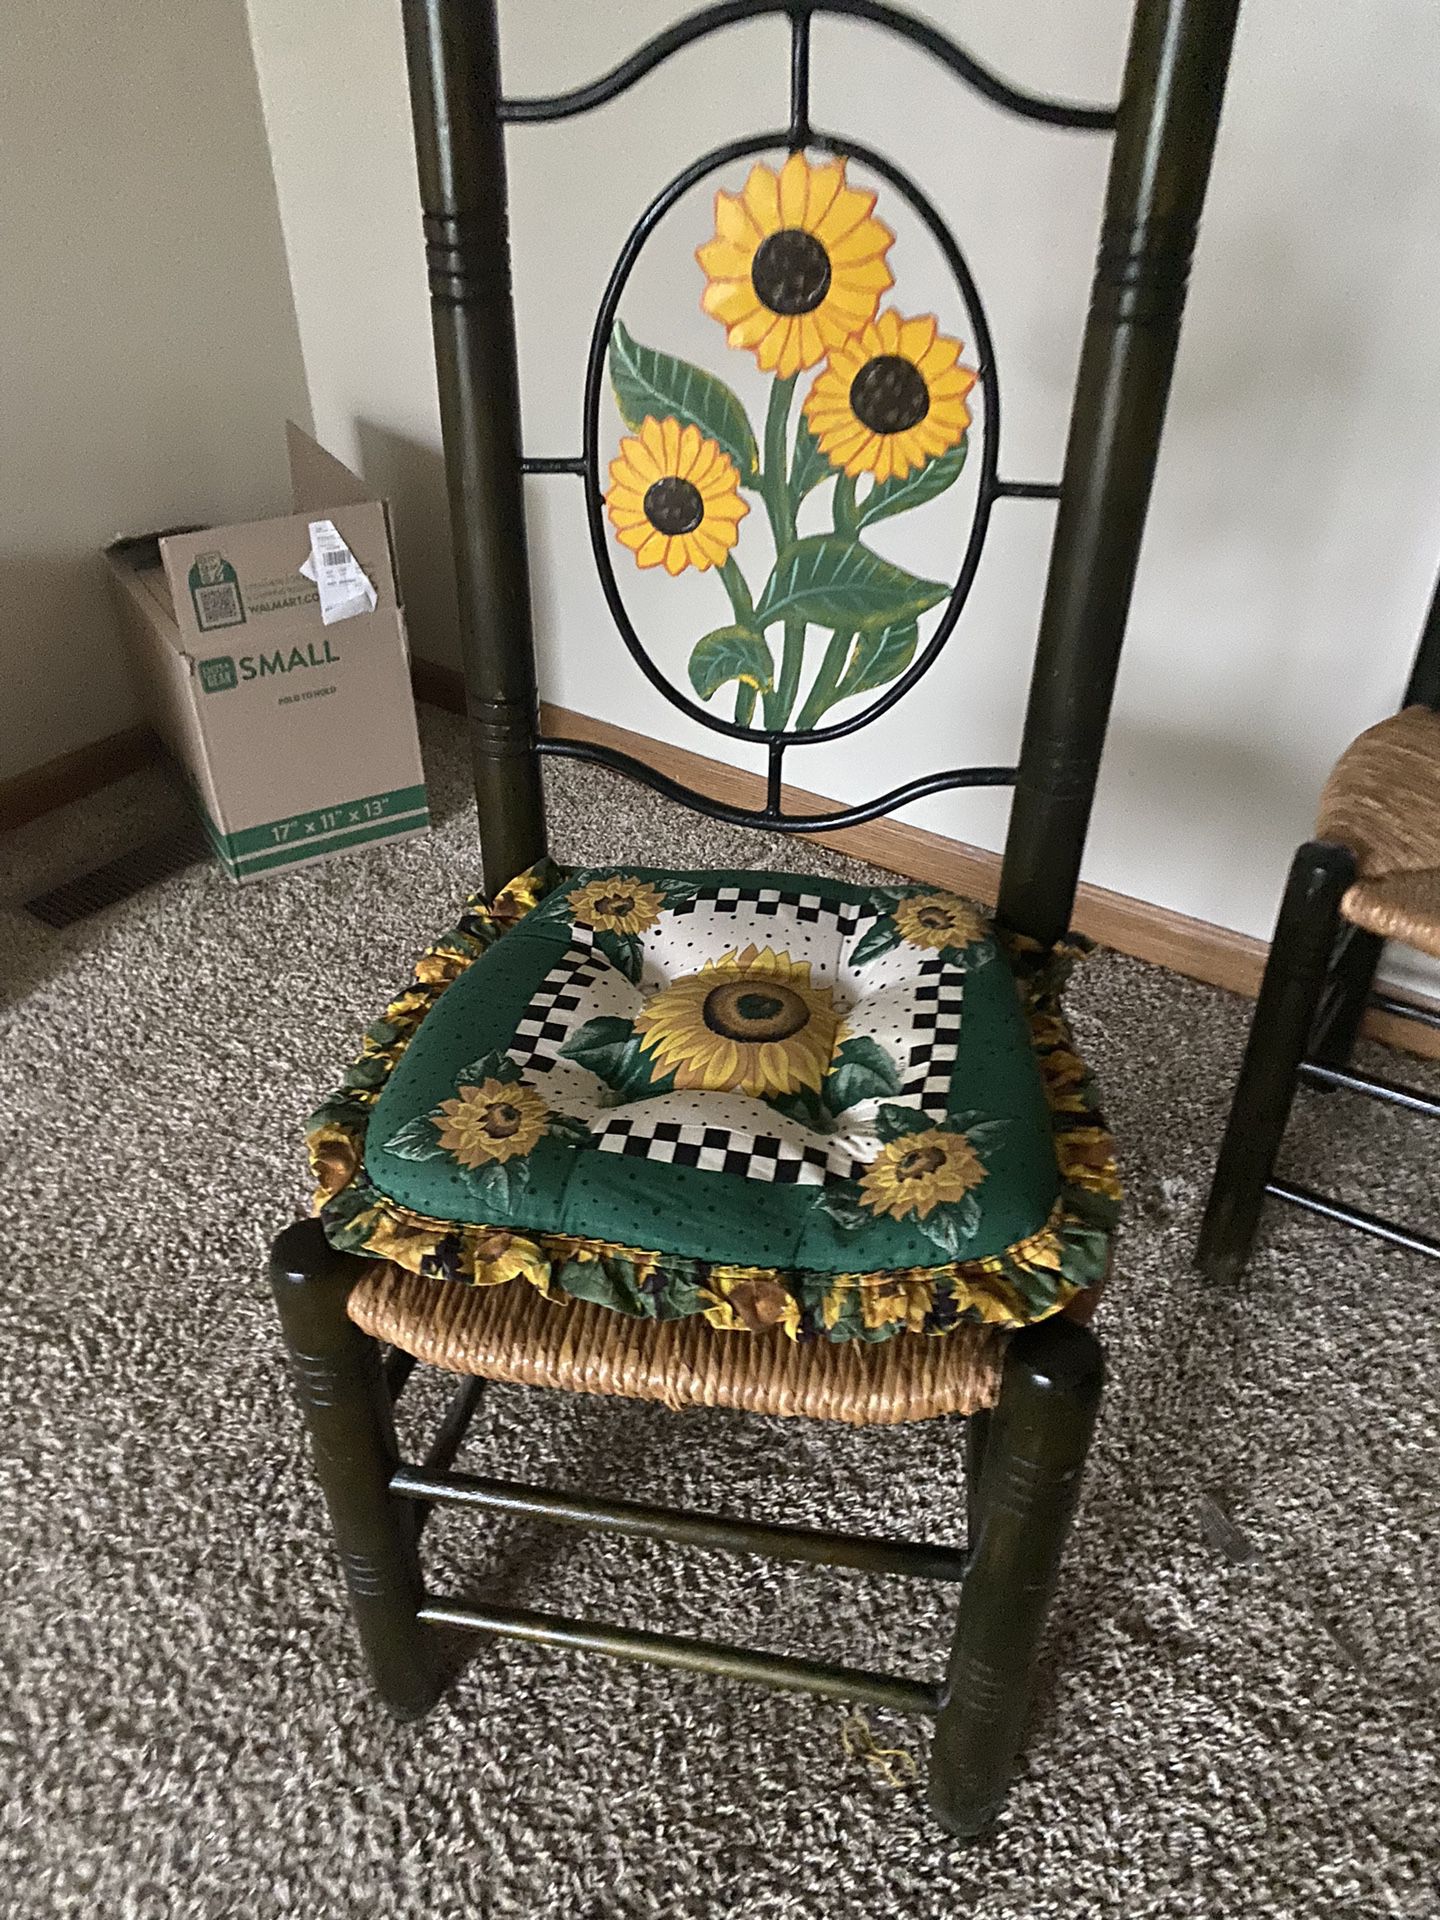 Vintage Wicker Dining Chairs